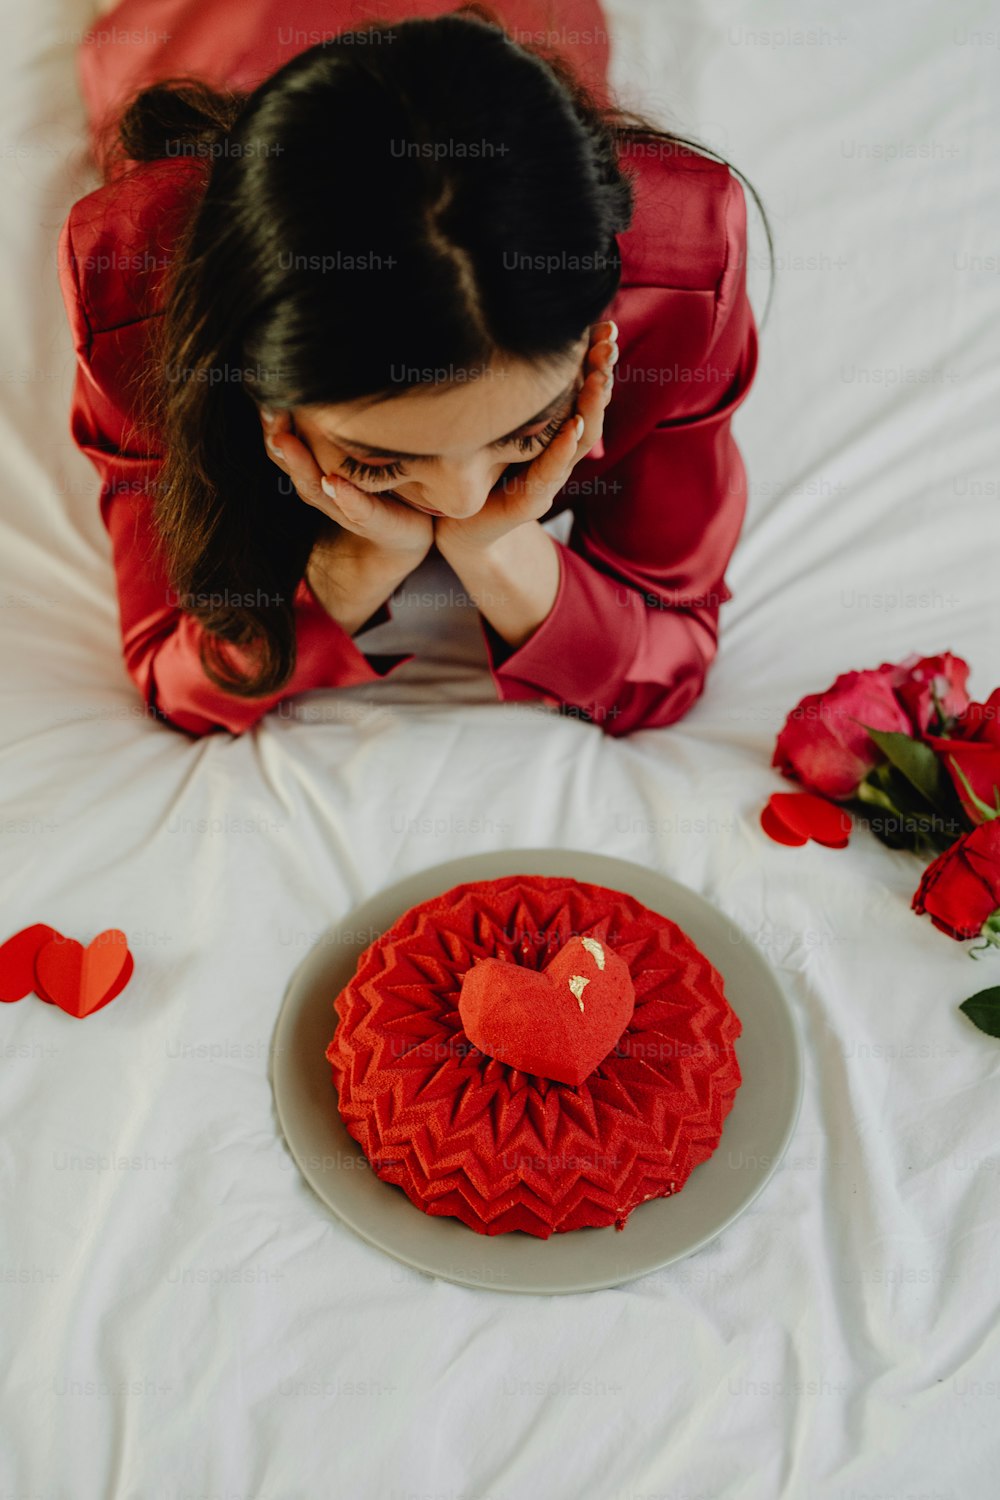 a woman sitting on a bed next to a heart shaped cake